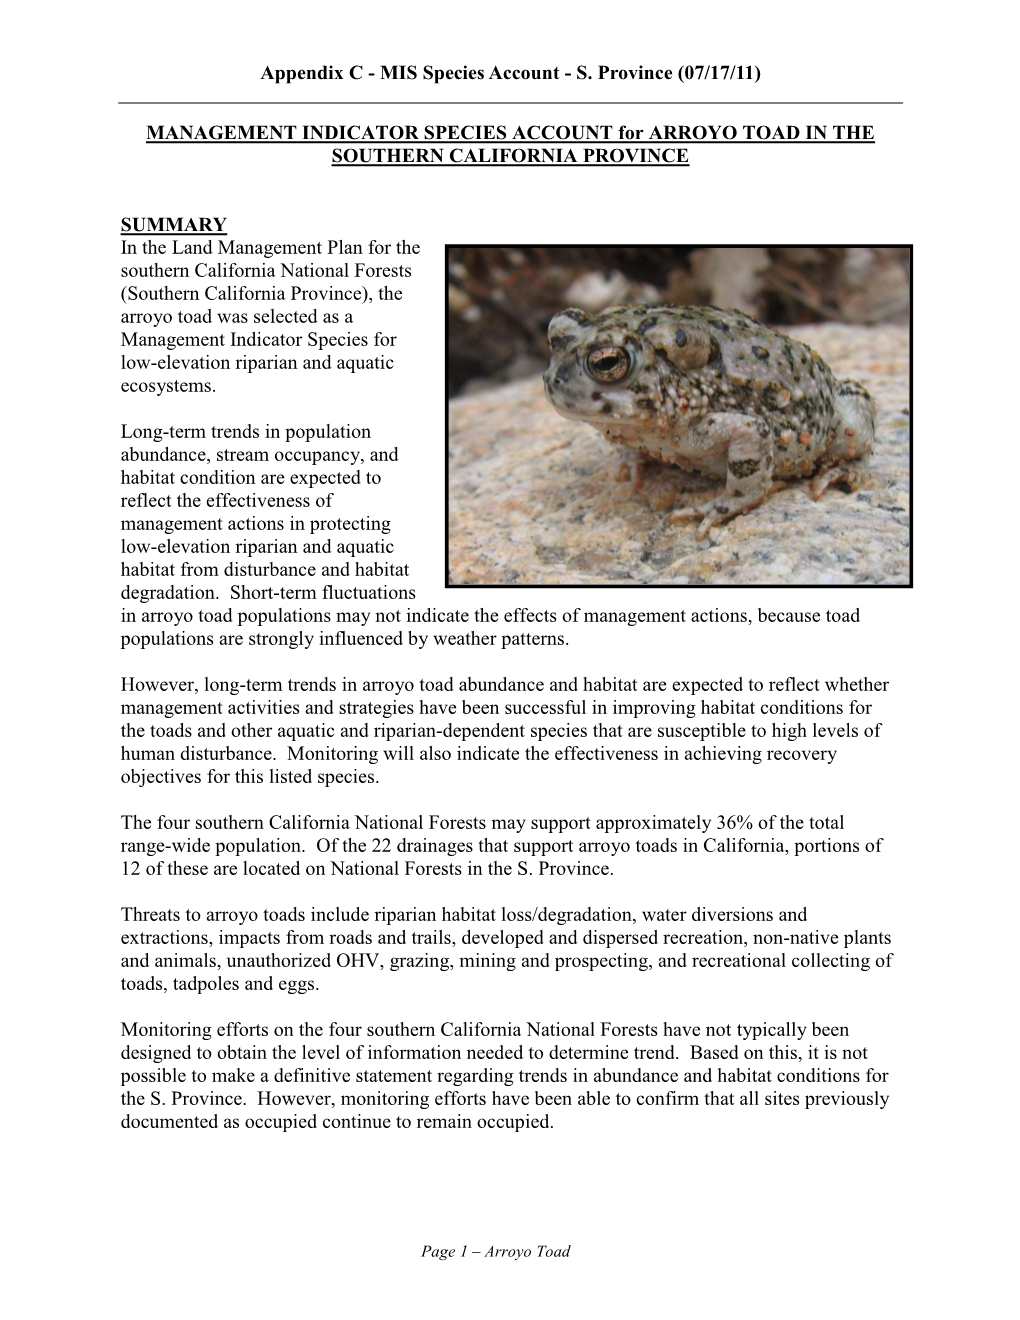 MANAGEMENT INDICATOR SPECIES ACCOUNT for ARROYO TOAD in the SOUTHERN CALIFORNIA PROVINCE